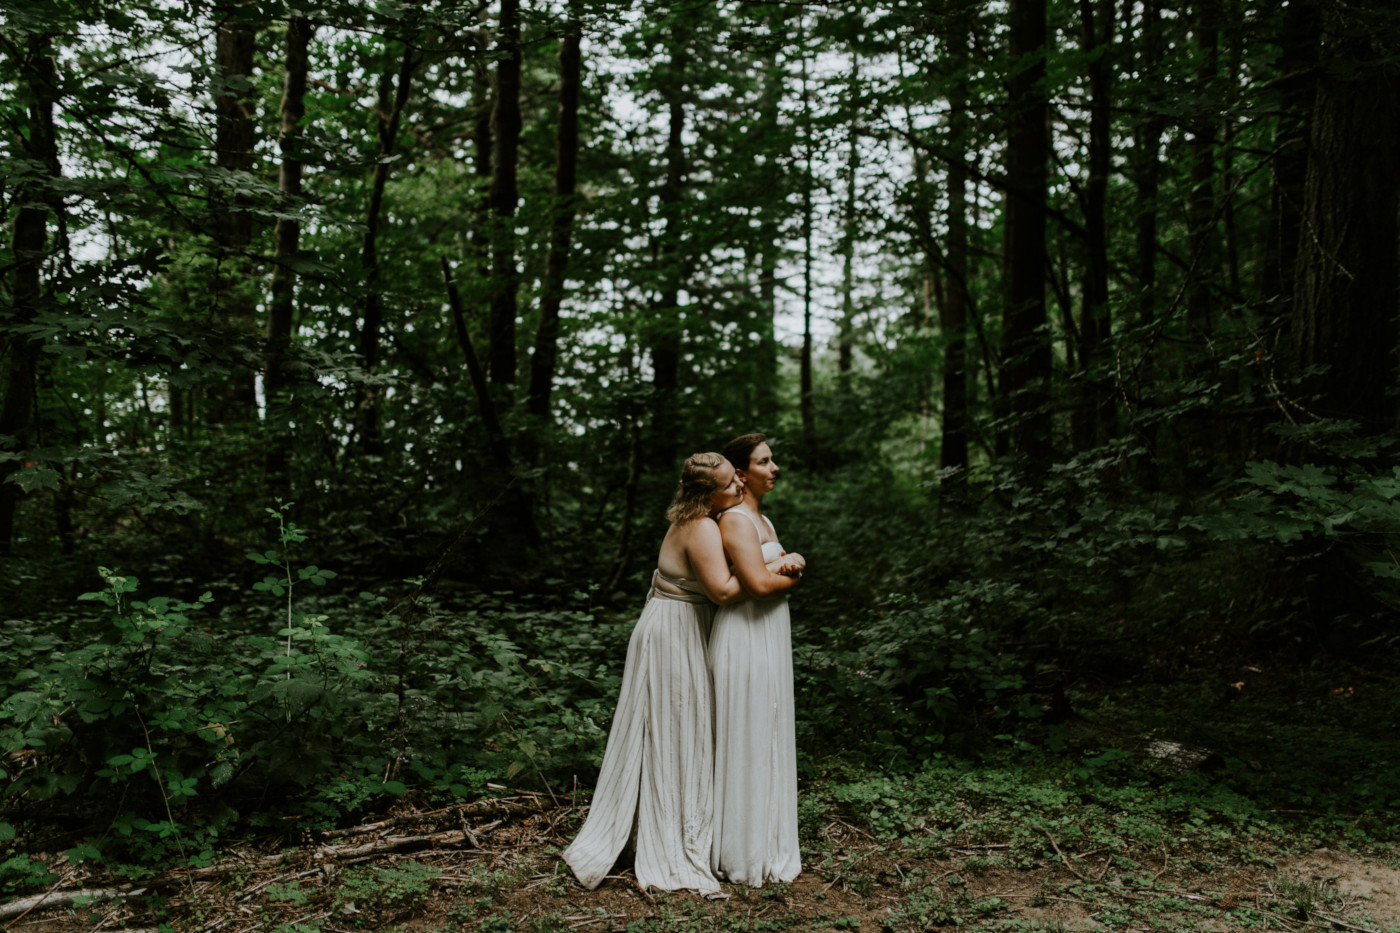 Kate and Audrey hug in front of the forest. Elopement wedding photography at Bridal Veil Falls by Sienna Plus Josh.